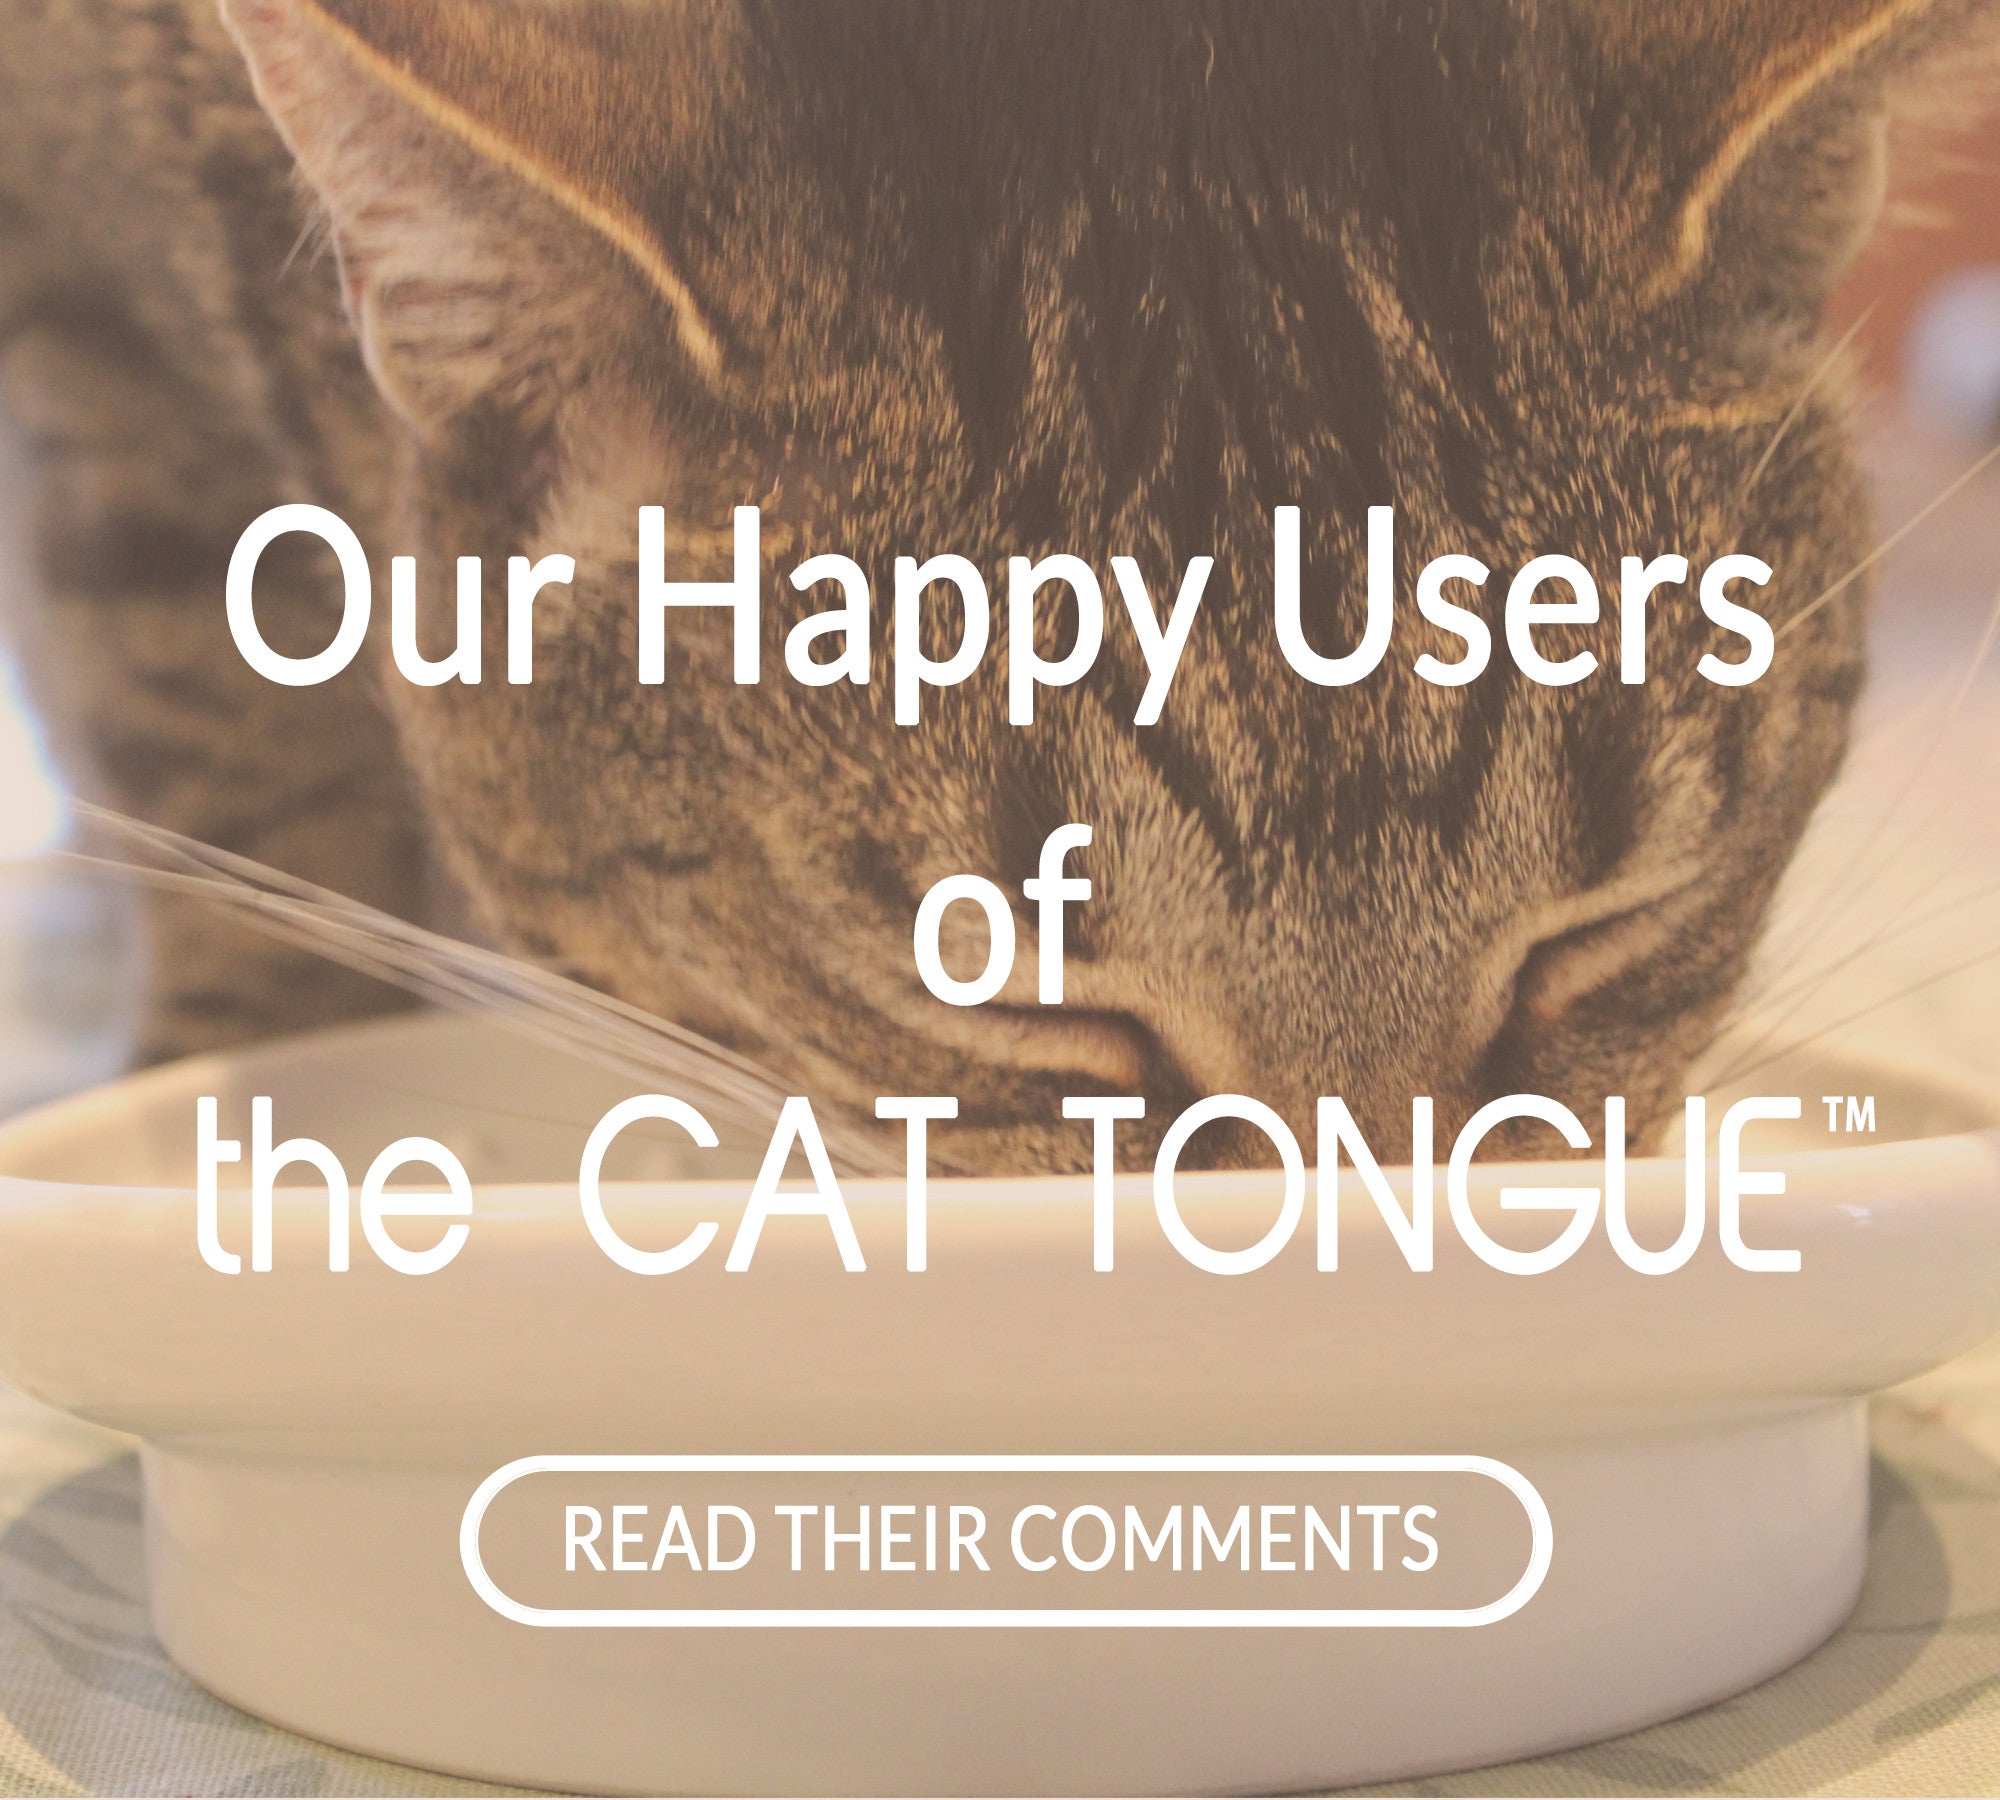 Our Happy User comements